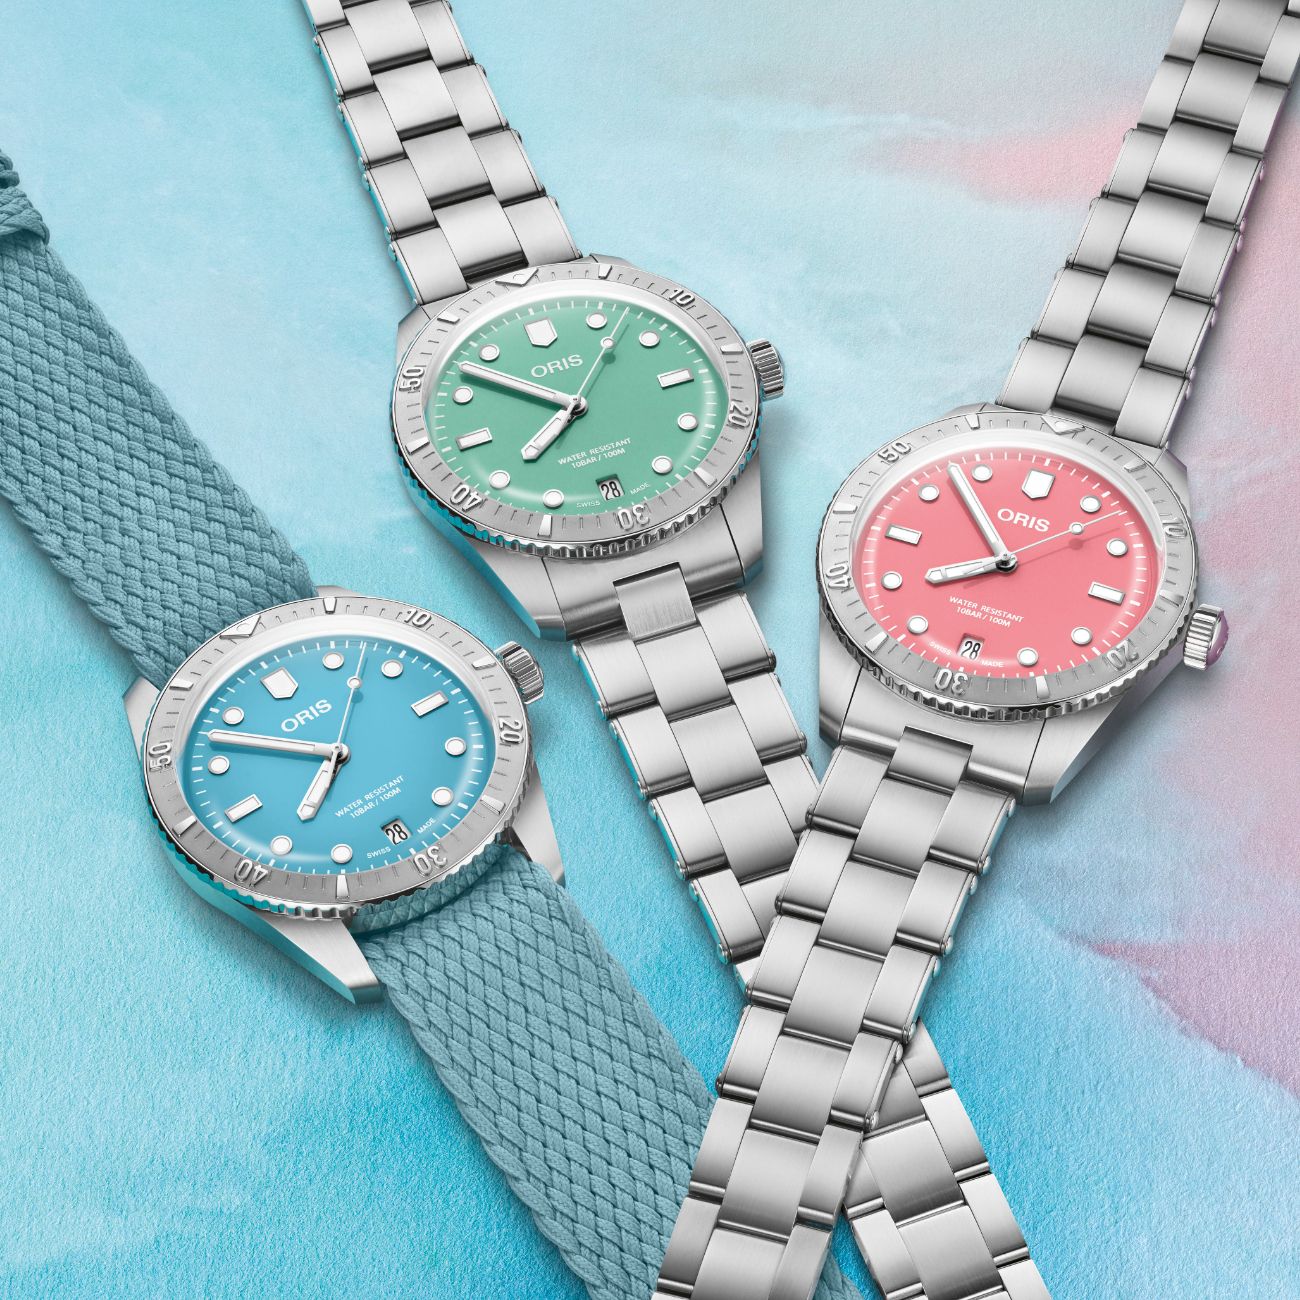 Presenting The New Oris Diver’s Sixty-Five Cotton Candy Edition—In Steel